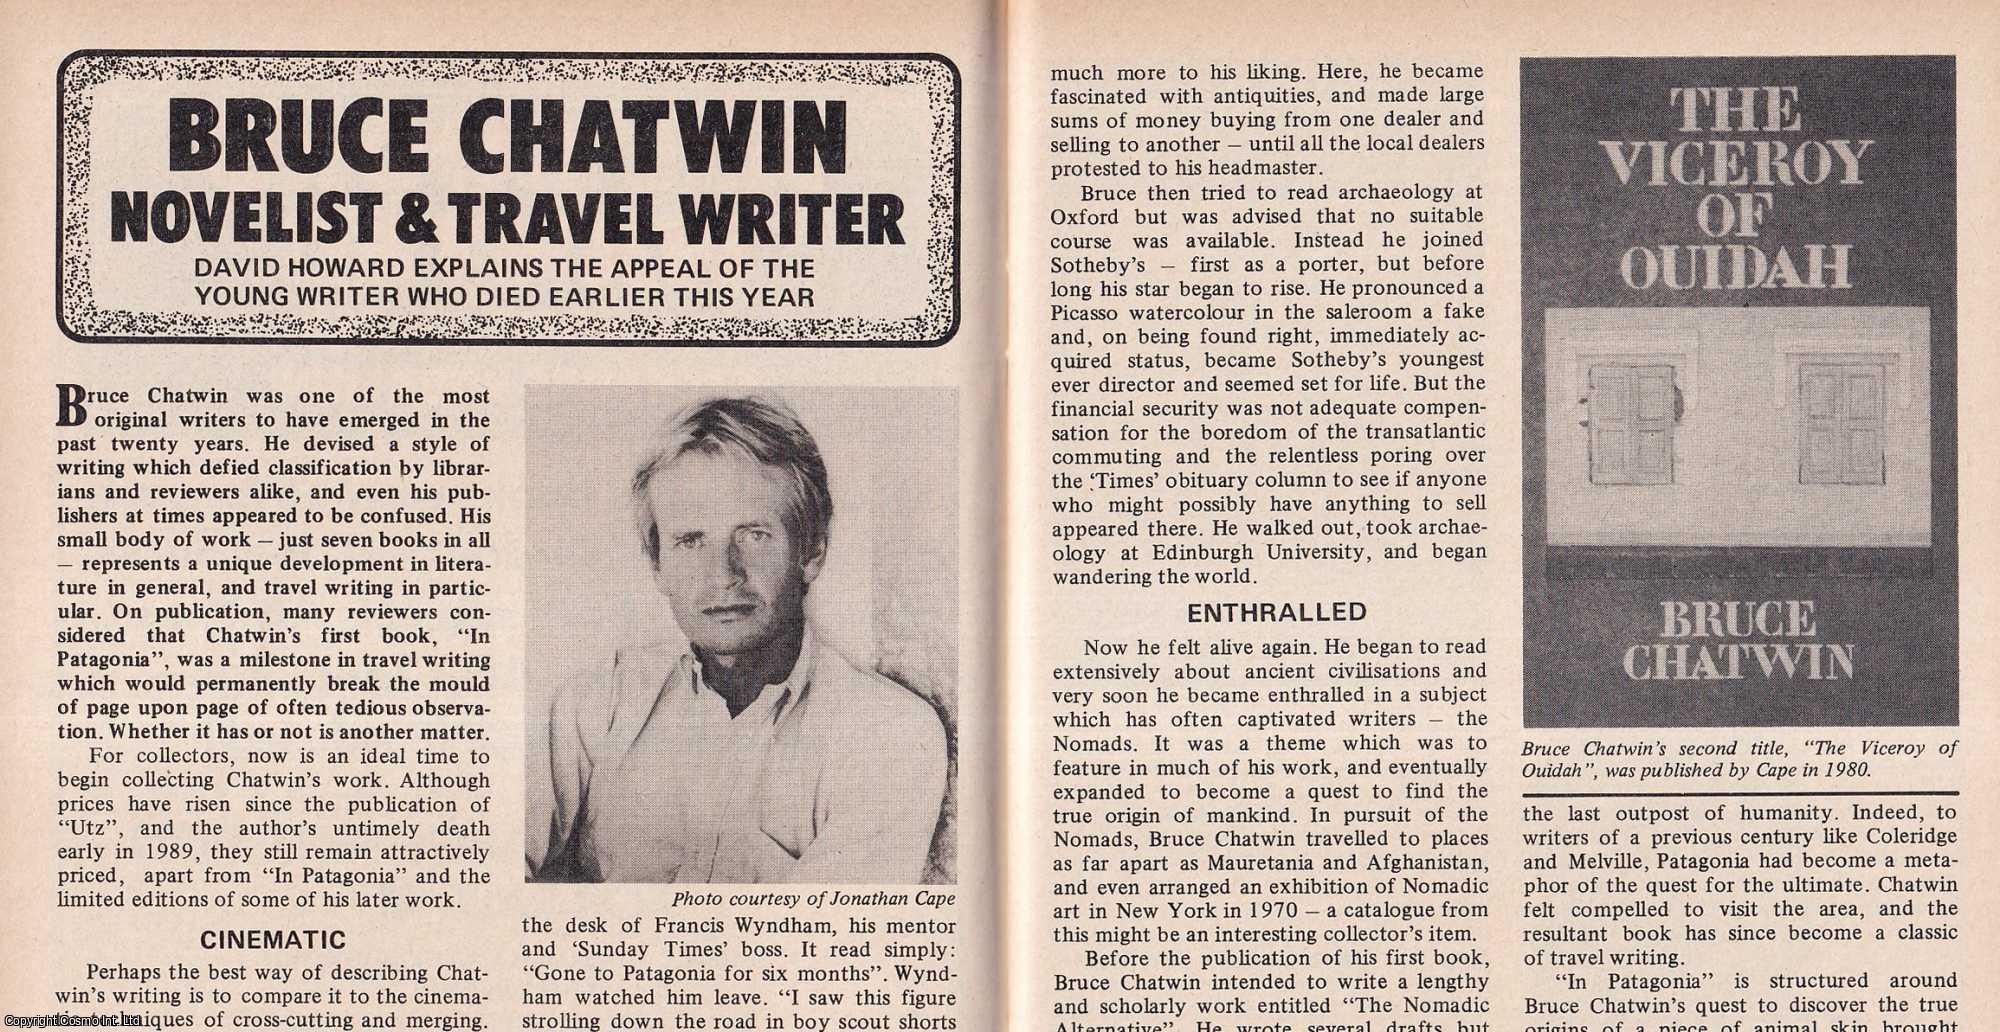 David Howard - Bruce Chatwin : English travel writer, novelist and journalist. This is an original article separated from an issue of The Book & Magazine Collector publication, 1989.